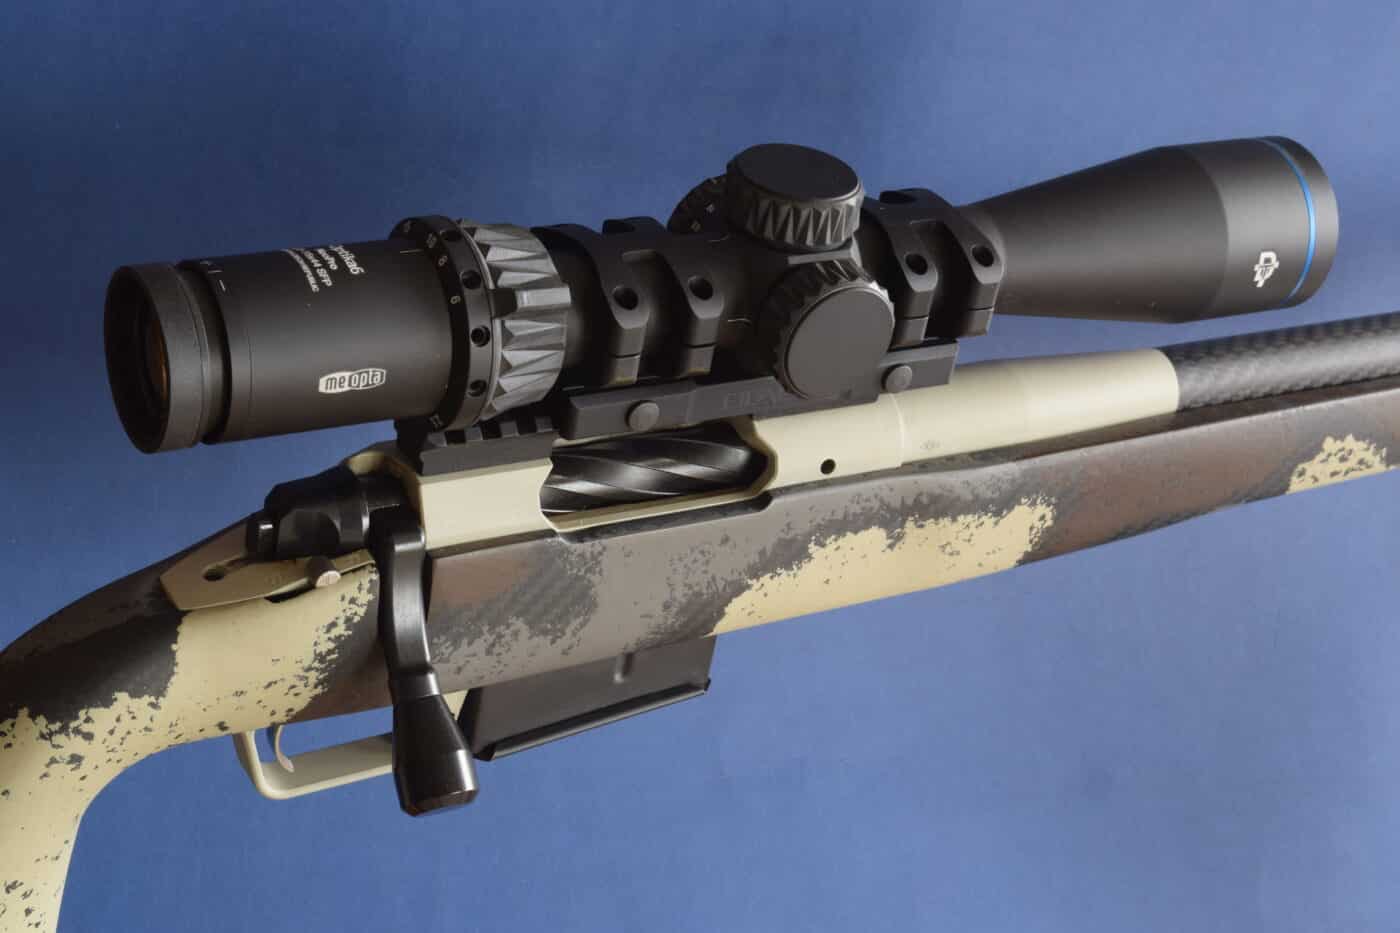 Springfield Waypoint hunting rifle with Meopta scope